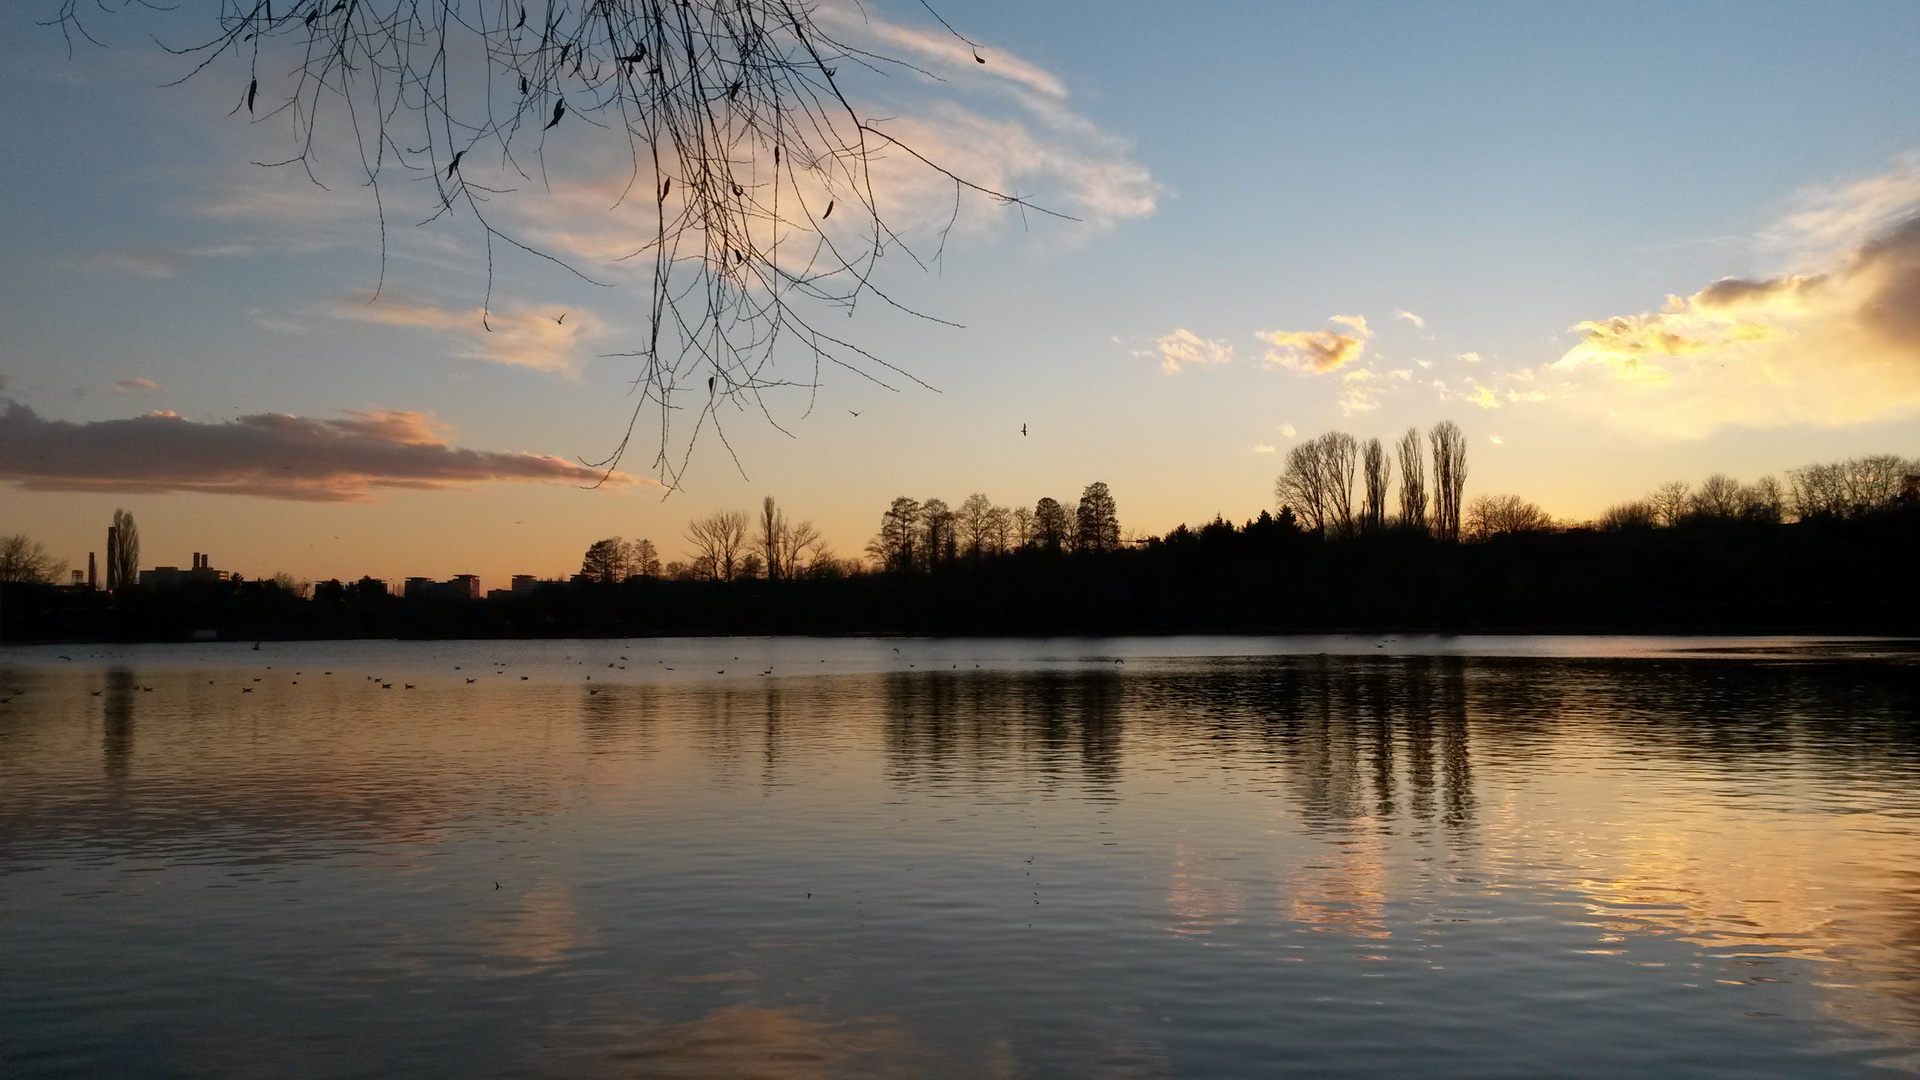 Crepuscule on the lake